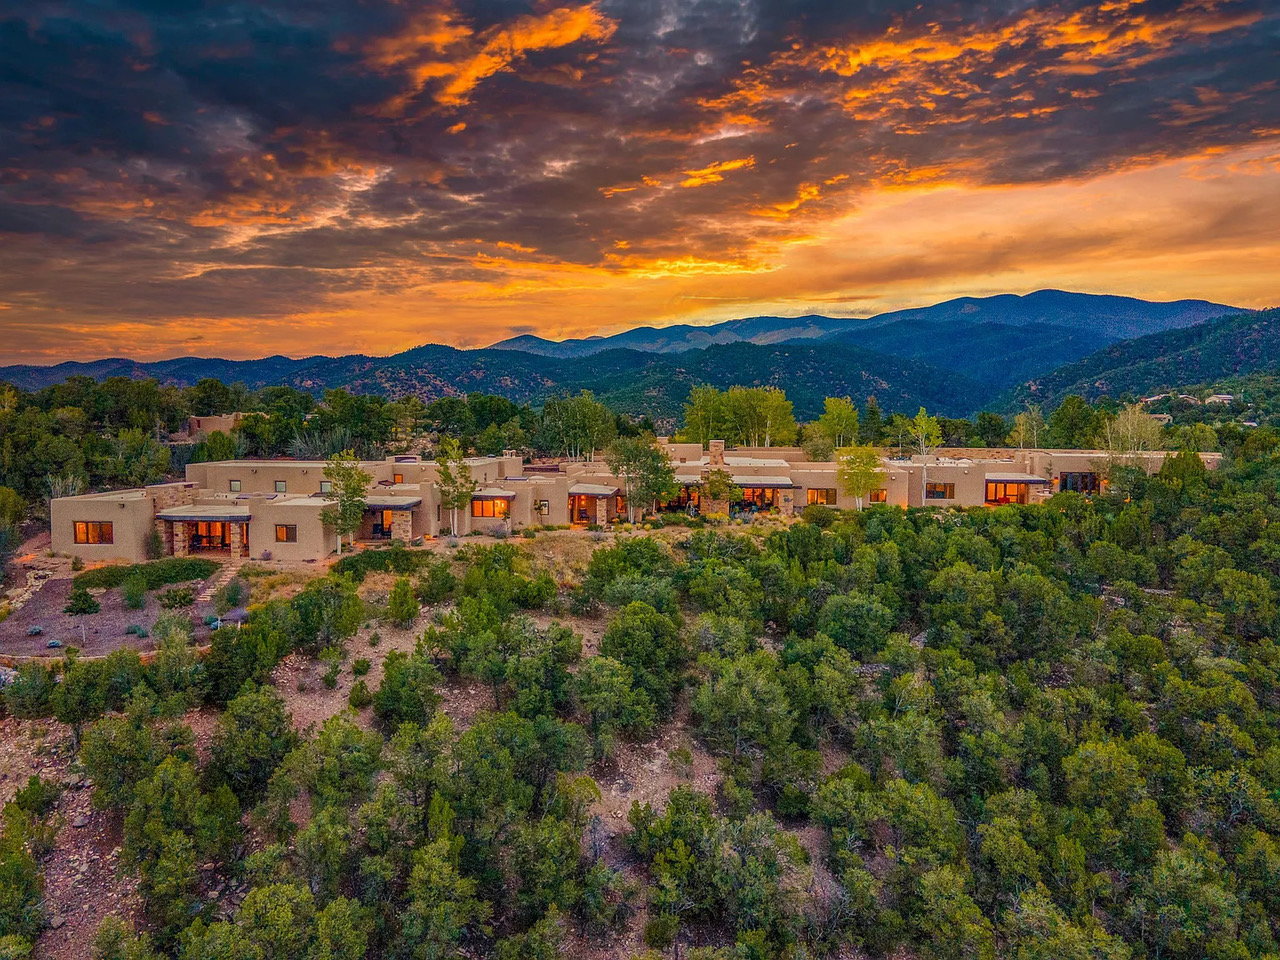 Exterior view of 1432 Old Sunset Trail, a sprawling adobe mansion in Santa Fe, New Mexico on the market for $8.5 million.